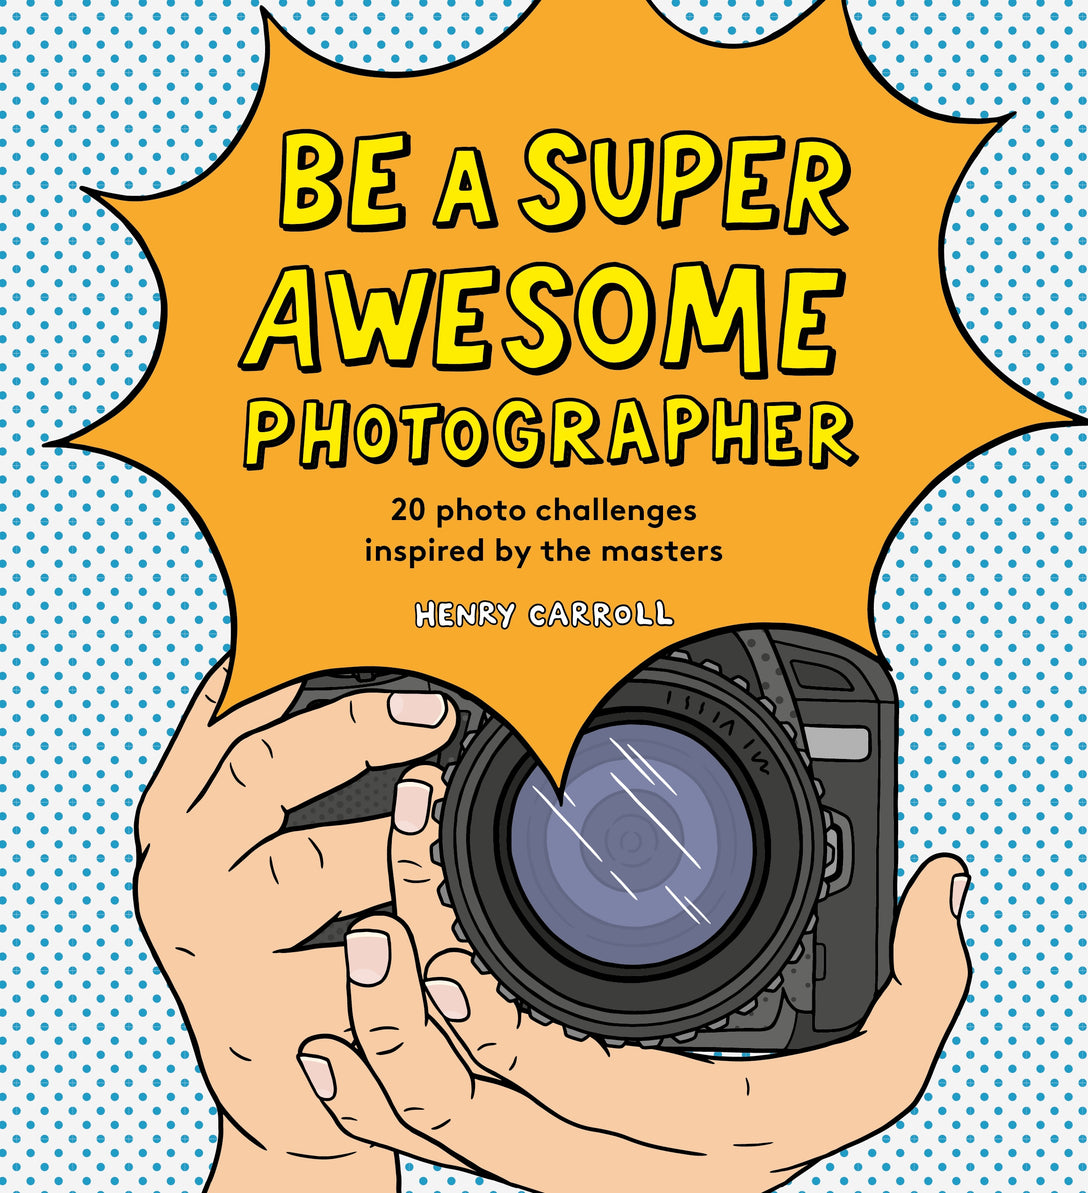 Be a Super Awesome Photographer by Henry Carroll